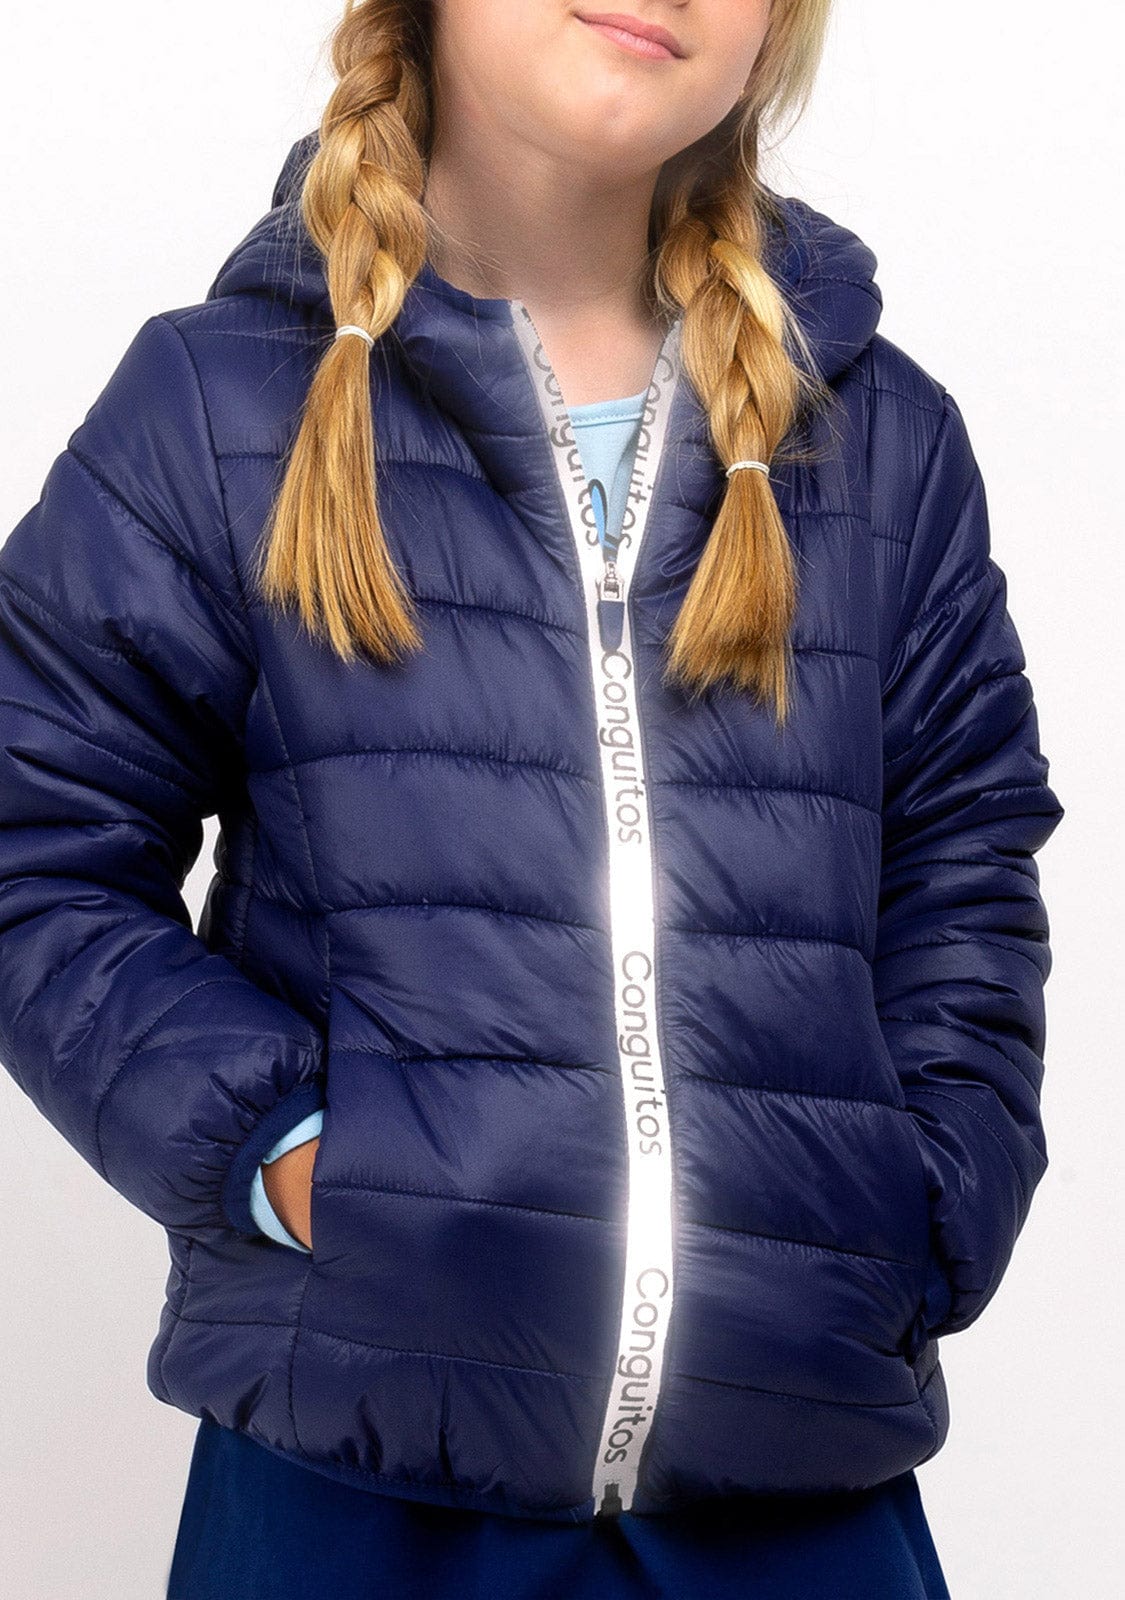 CONGUITOS TEXTIL Clothing Girl's Navy Recycled Reflective Anorak